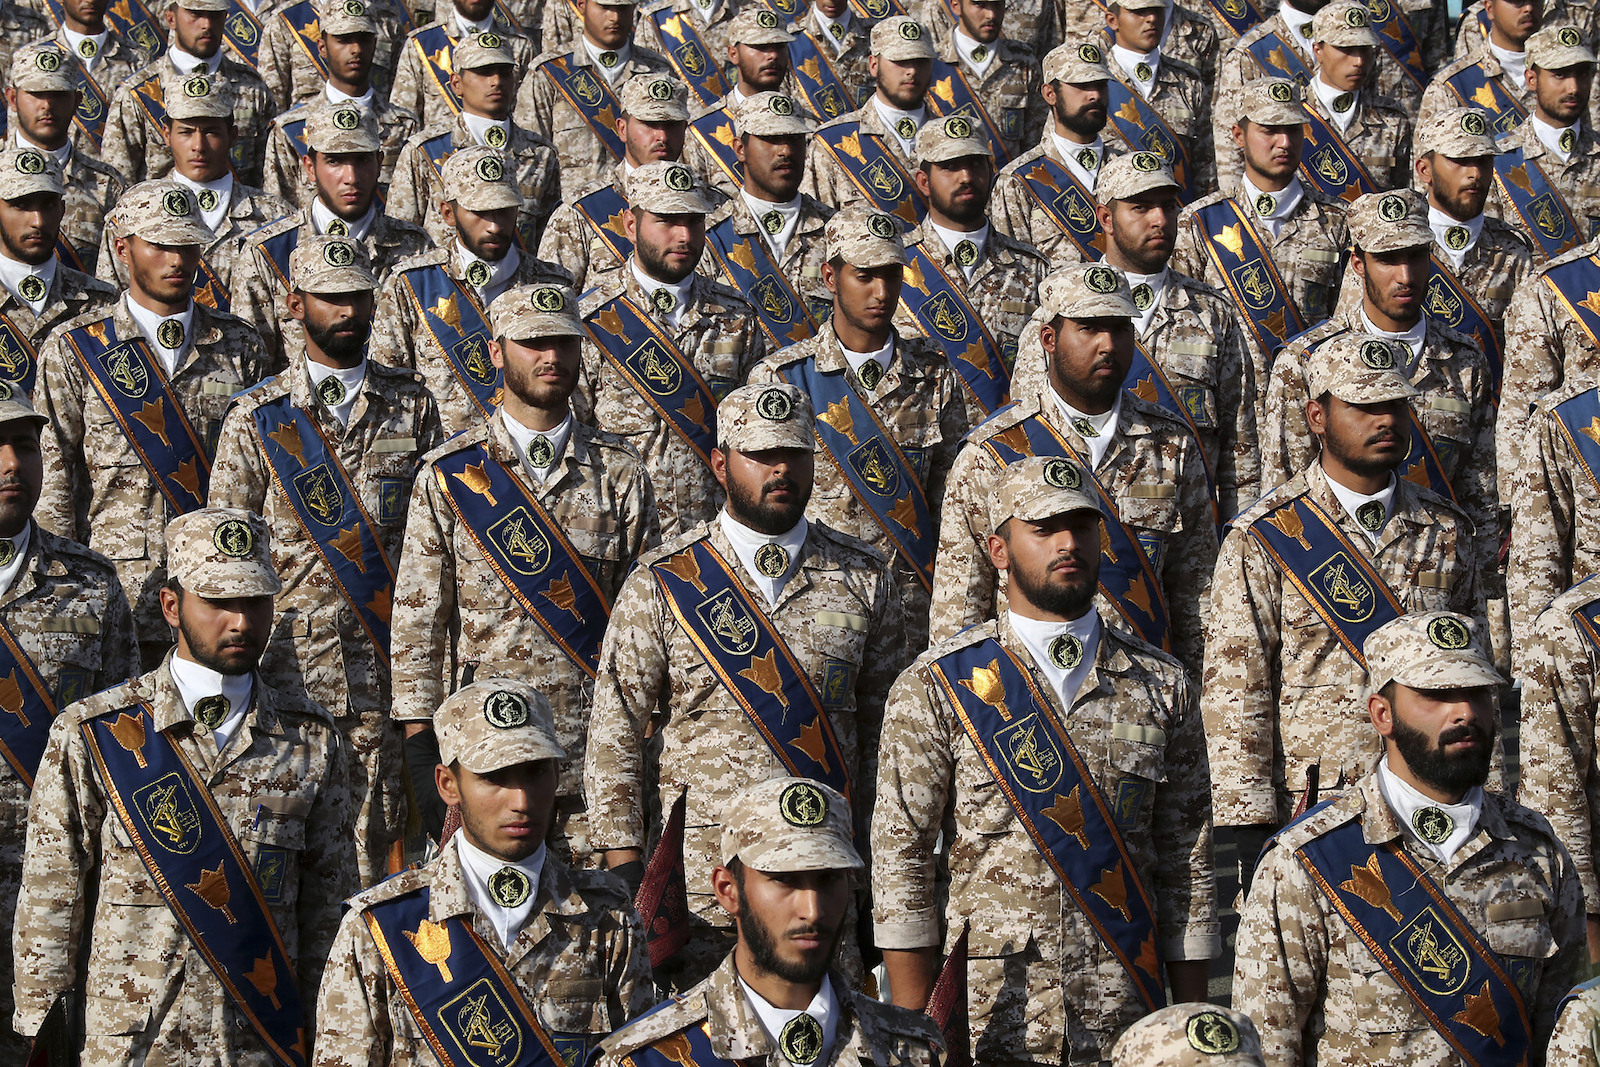 Iranian Revolutionary Guard troops during a military parade